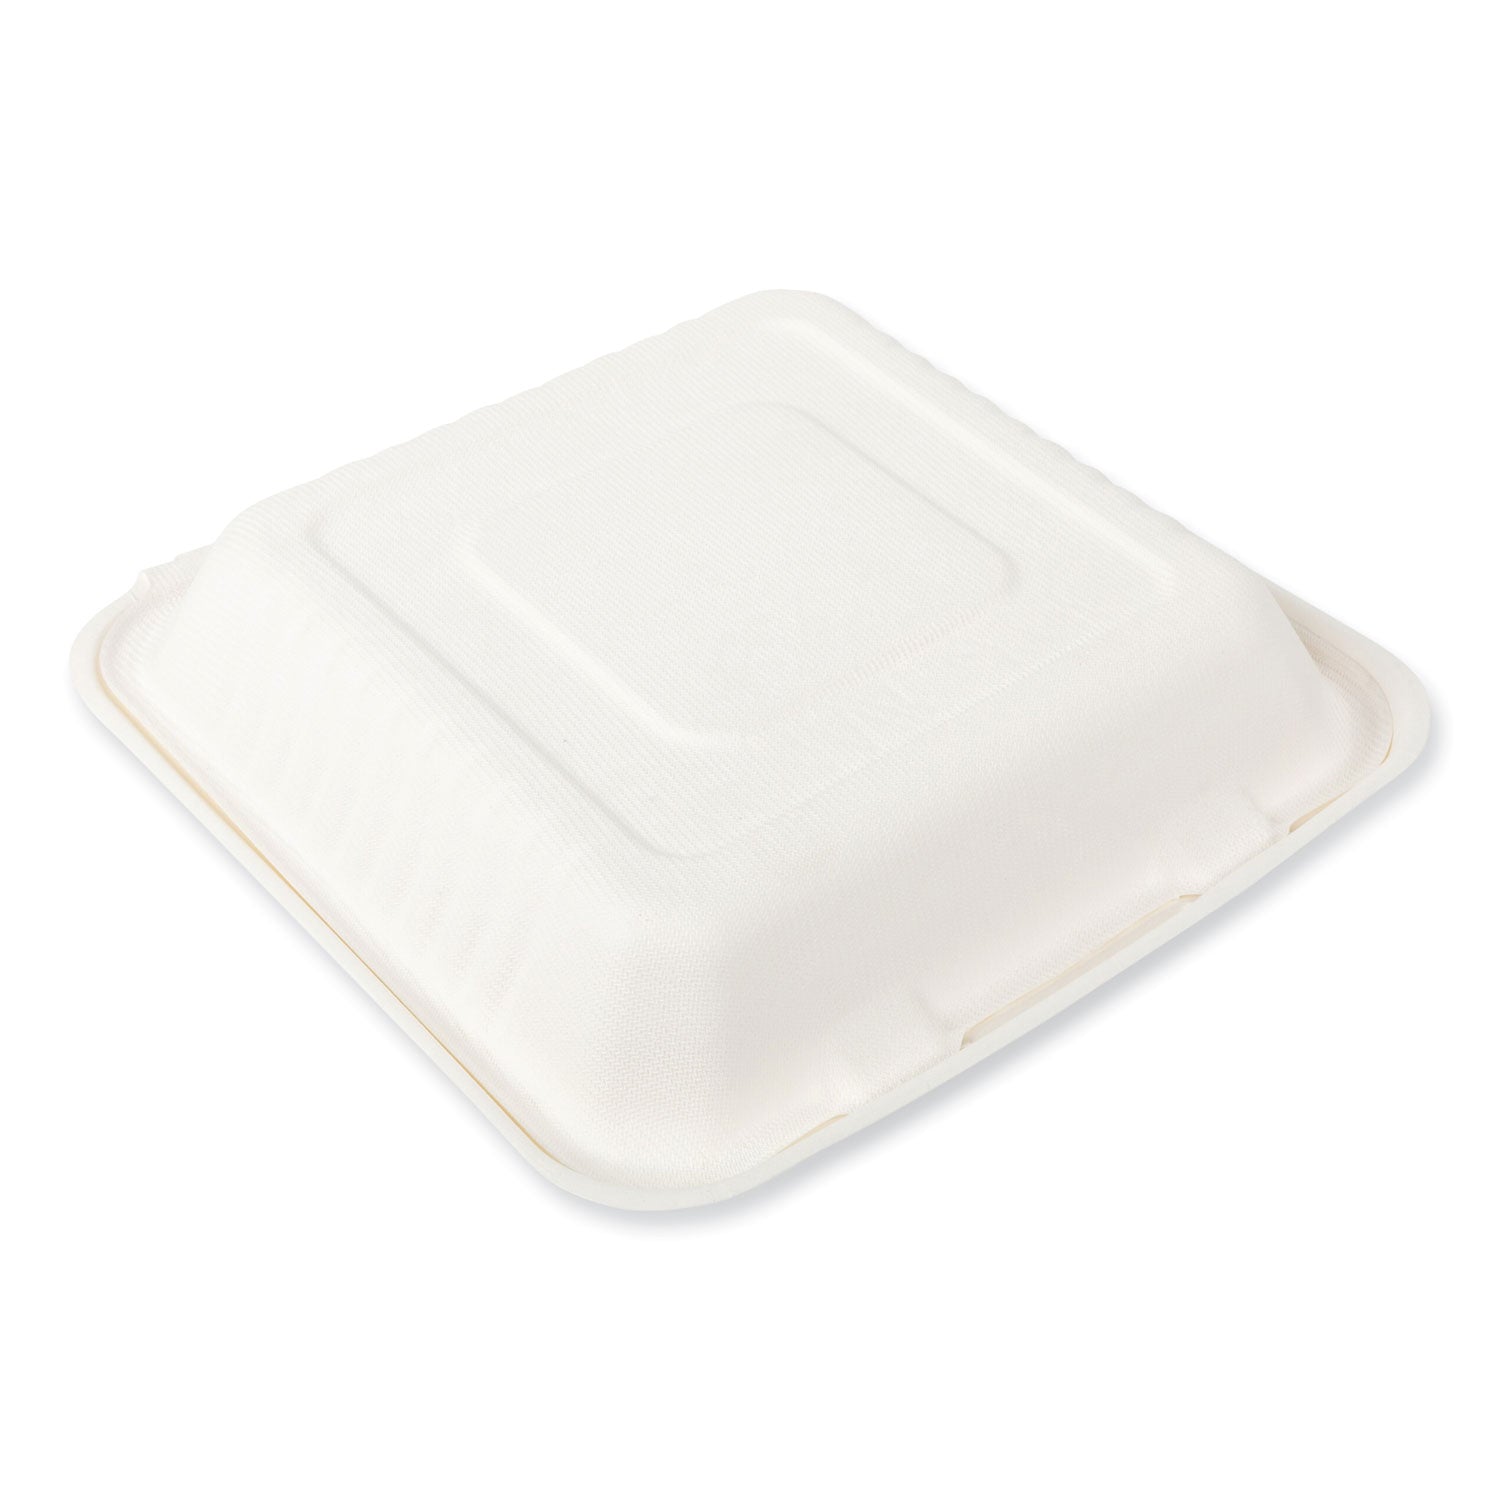 bagasse-pfas-free-food-containers-3-compartment-9-x-9-x-319-white-bamboo-sugarcane-200-carton_rpphl93npfa - 4